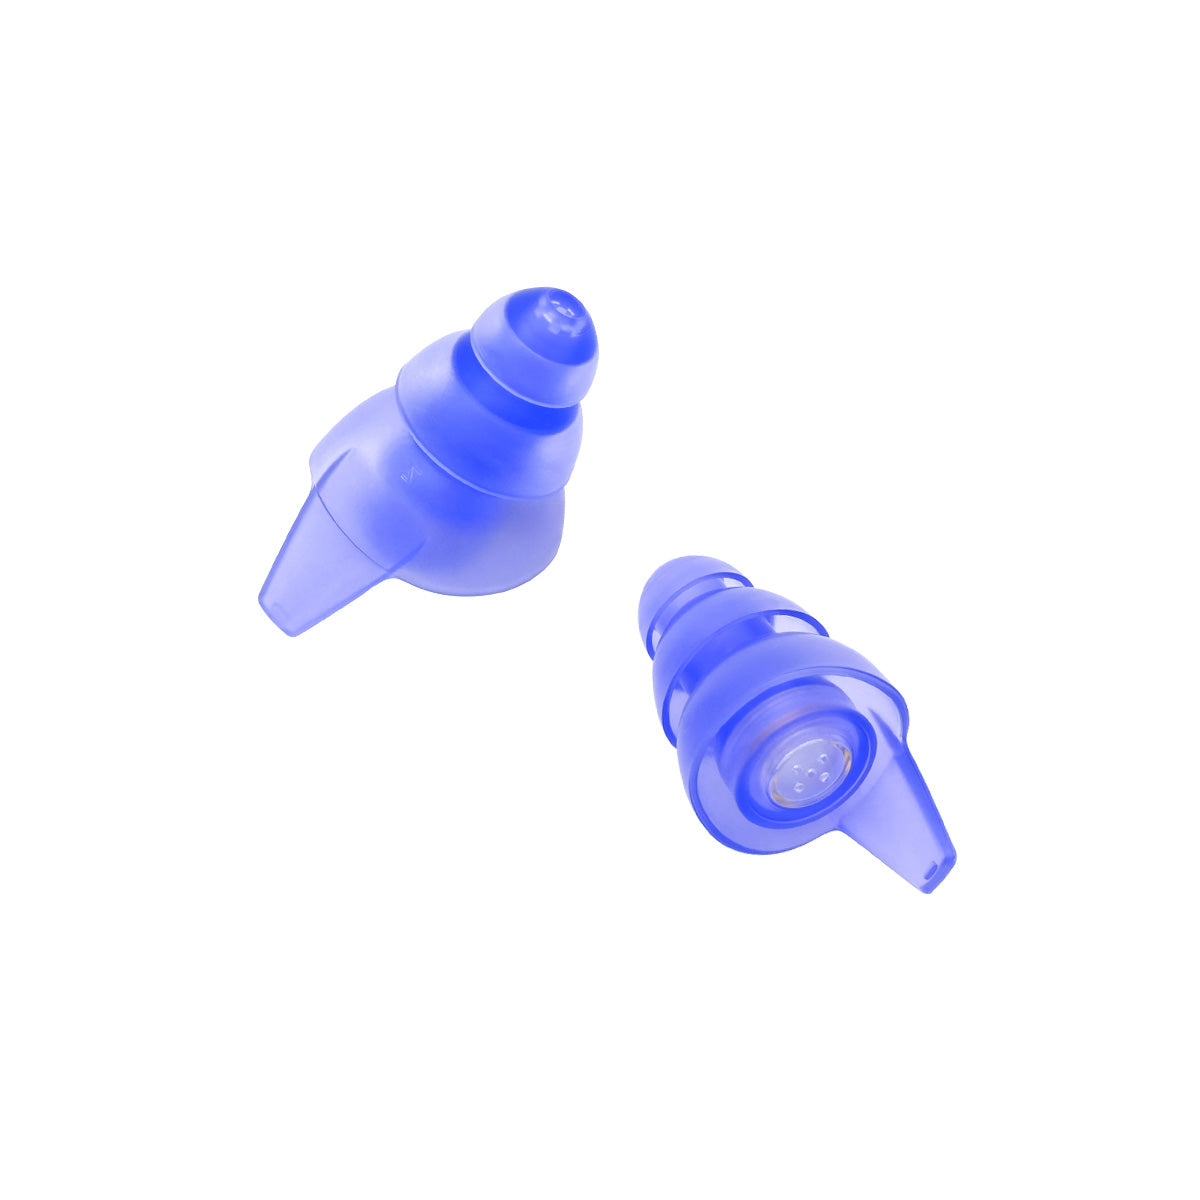 ADV. Eartune Live Universal Ear Plugs for Musicians and Concert Hearing Protection #color_purple